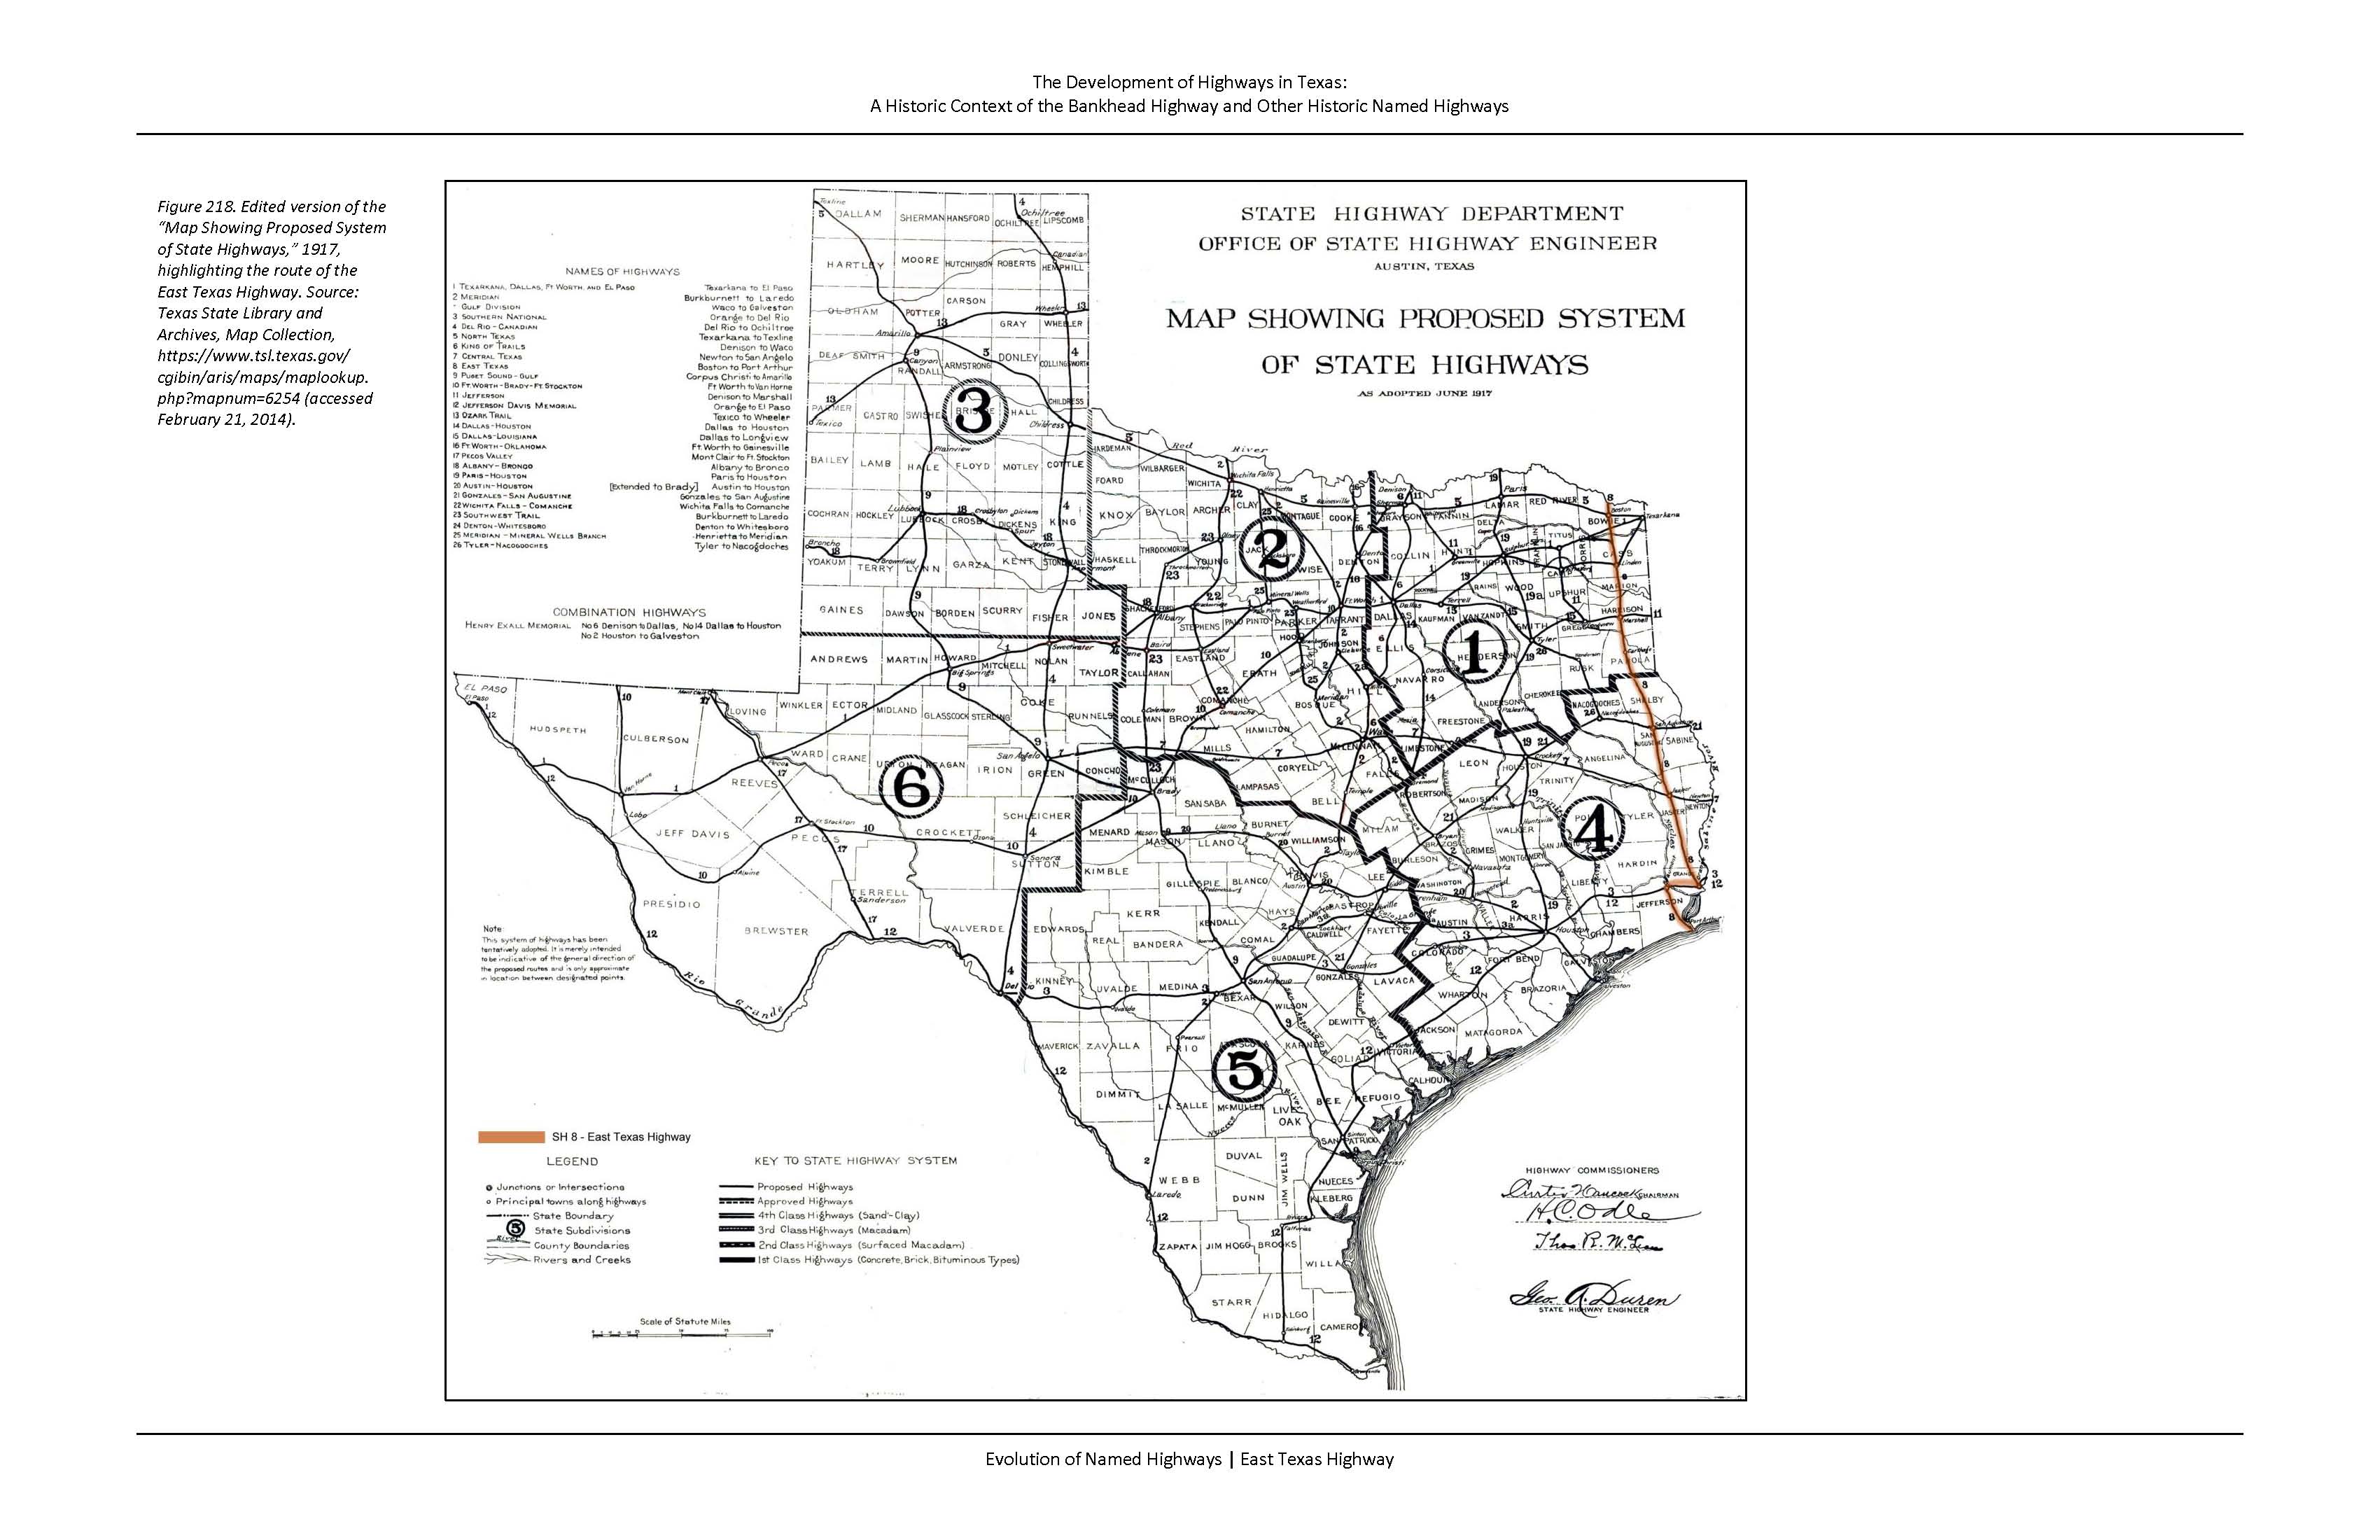 A black-and-white map of the East Texas Highway